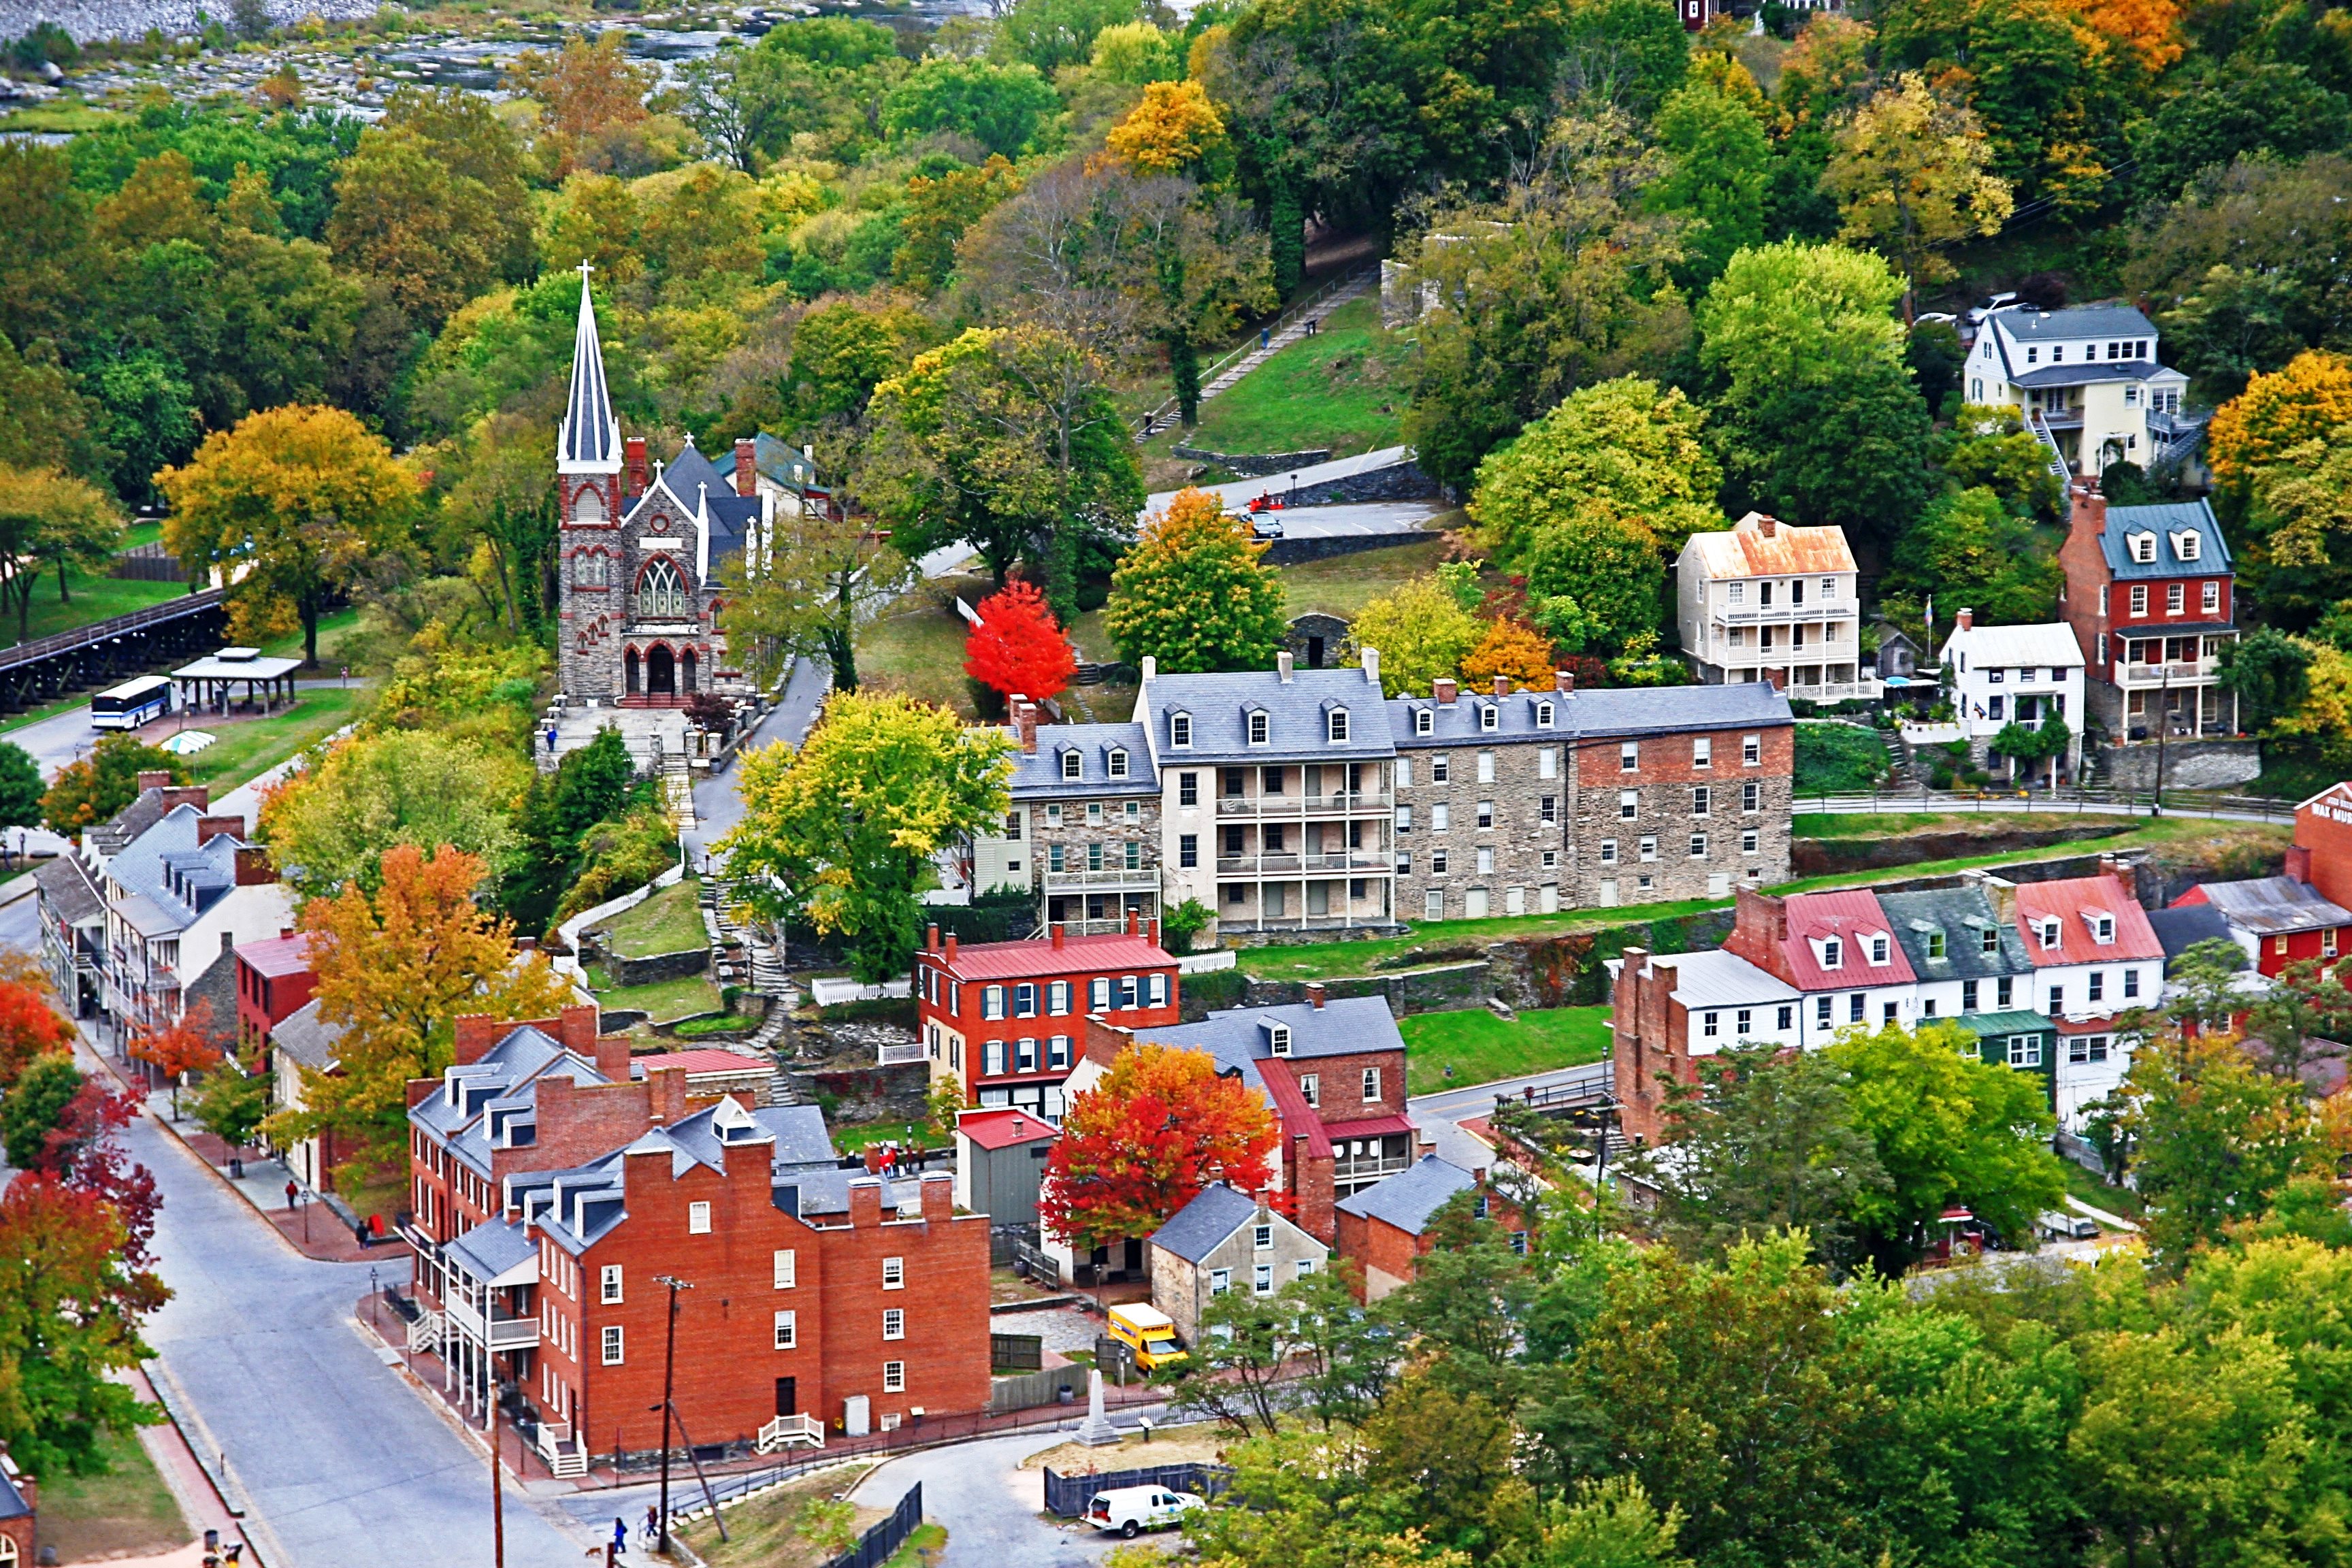 Wild, Wonderful West Virginia Encourages Travel to Harpers Ferry and Throug...